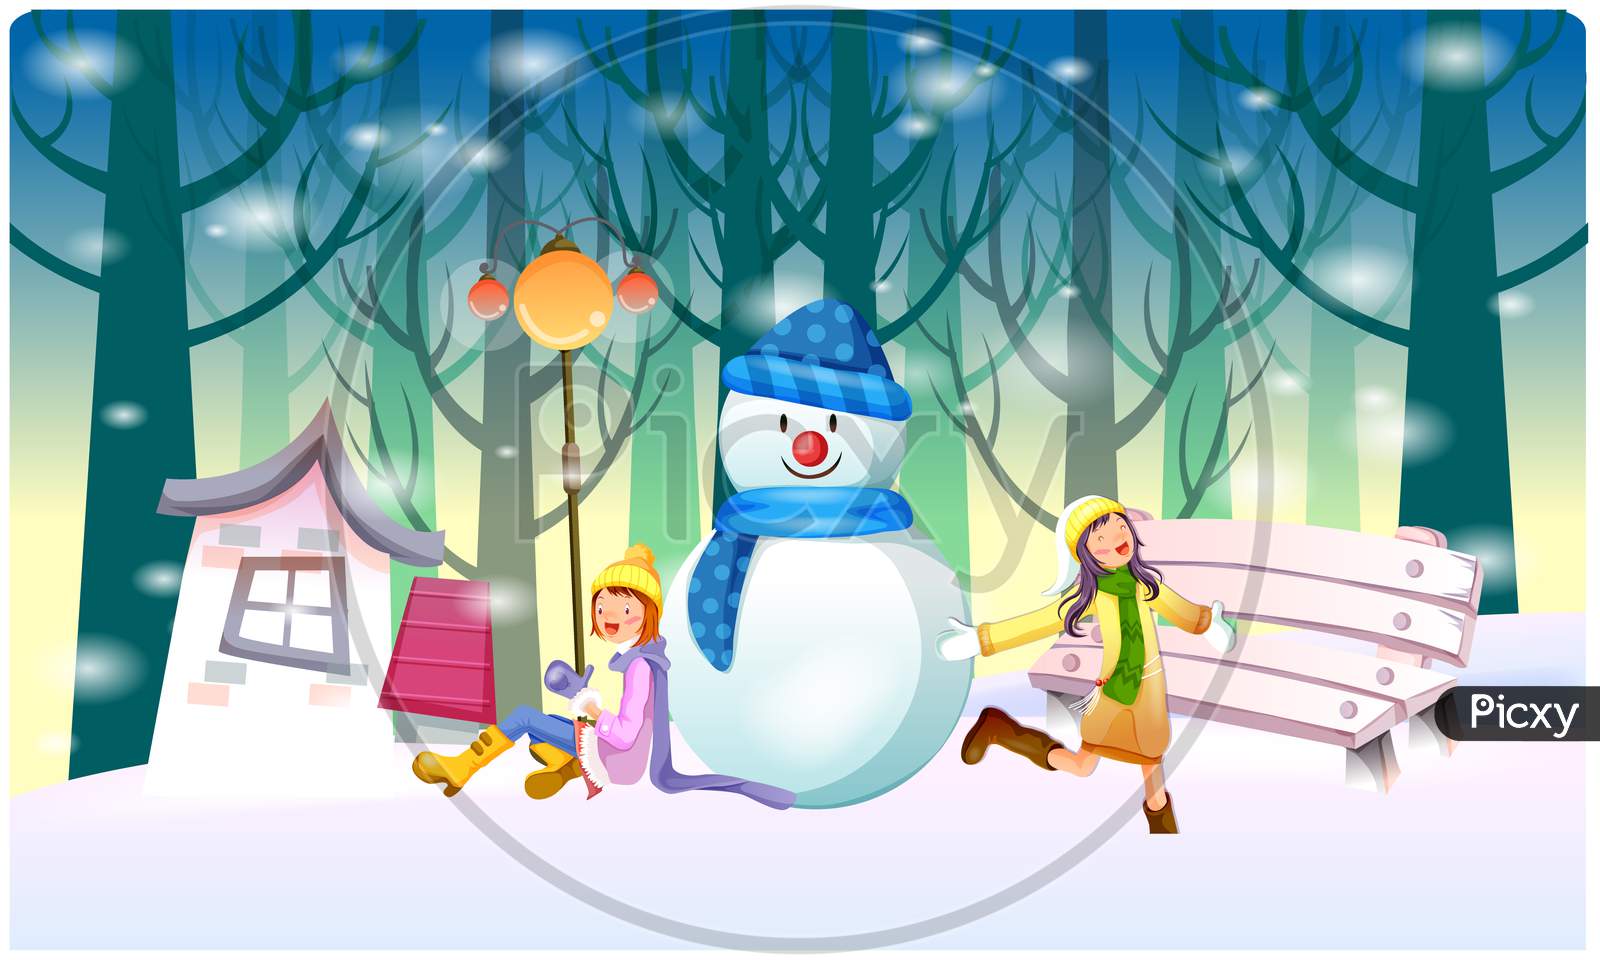 Girls Are Making And Playing With Snowman In Winter